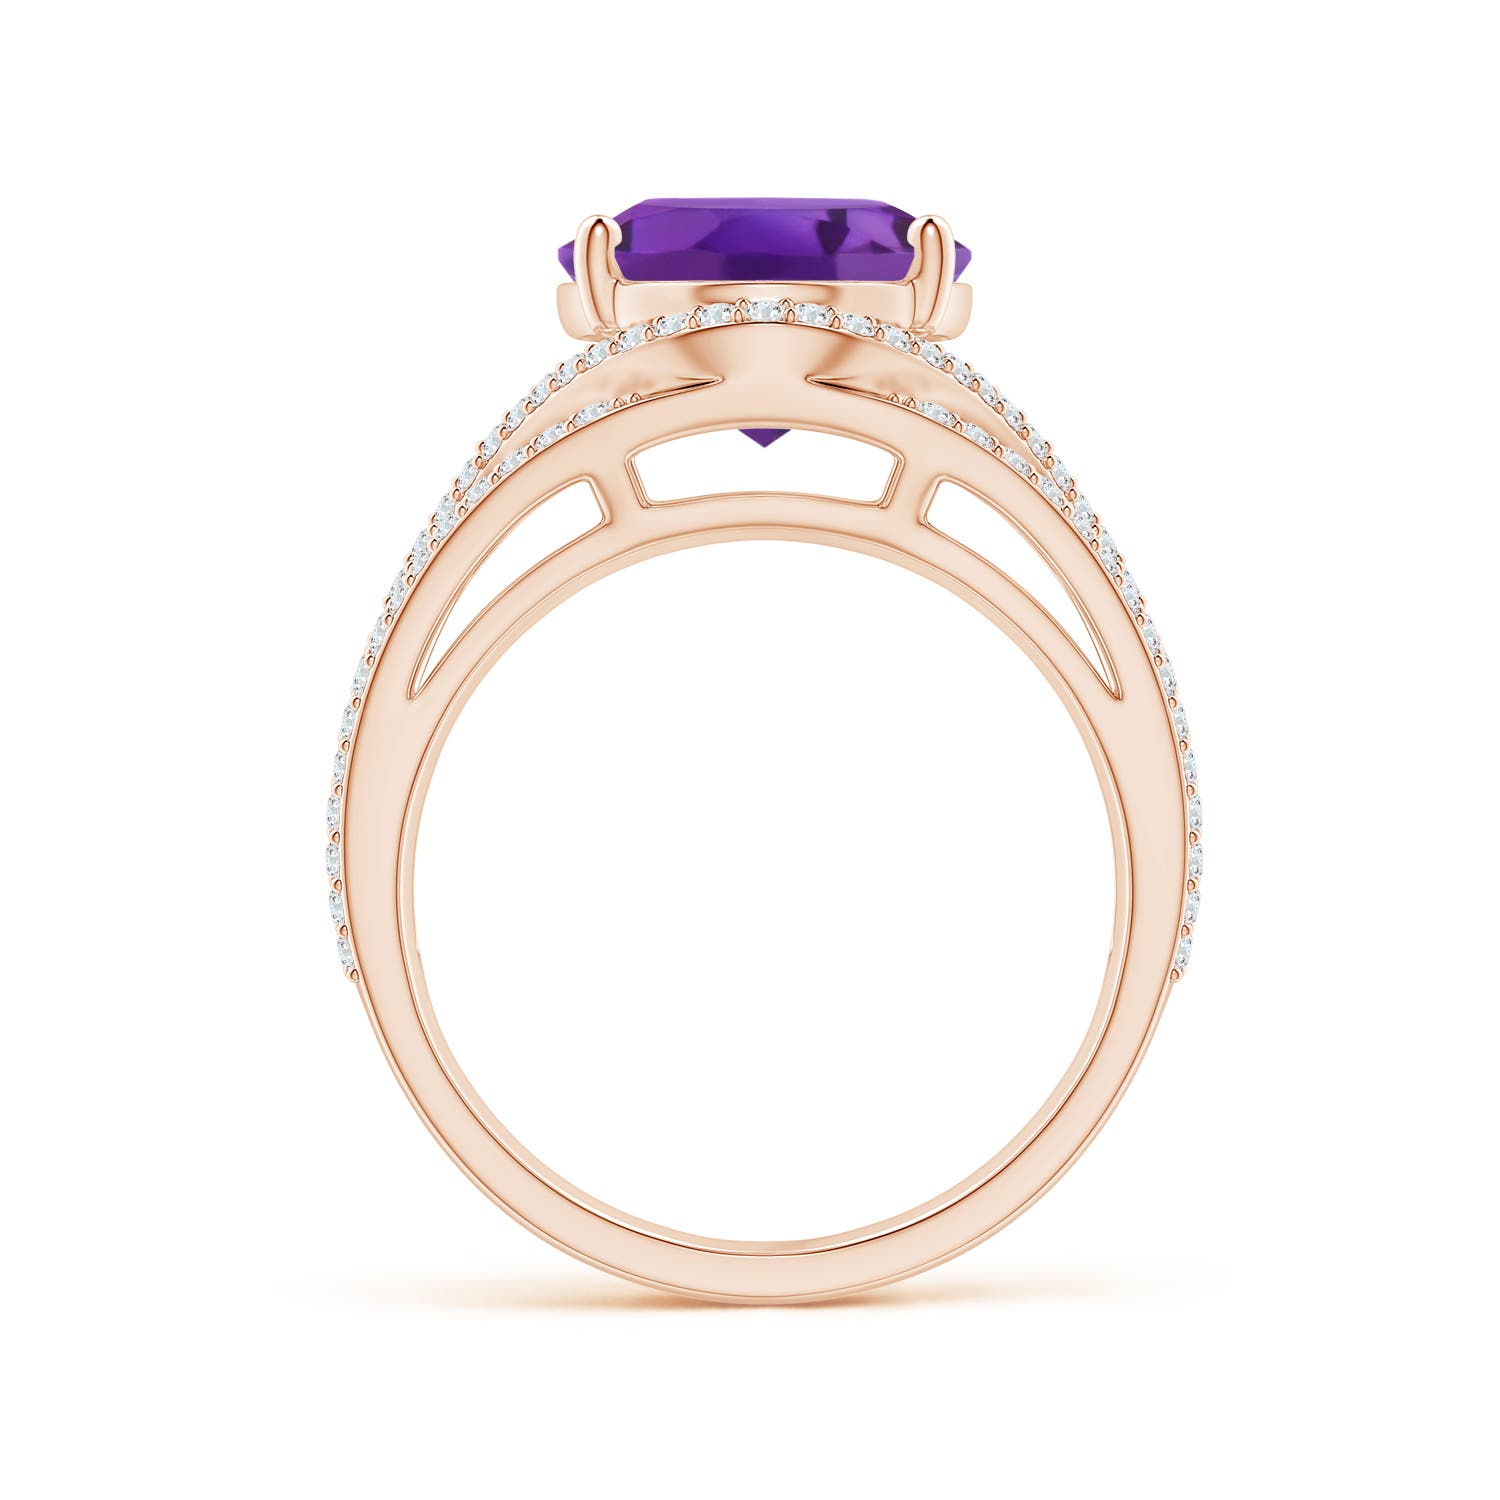 AAA - Amethyst / 5.89 CT / 14 KT Rose Gold